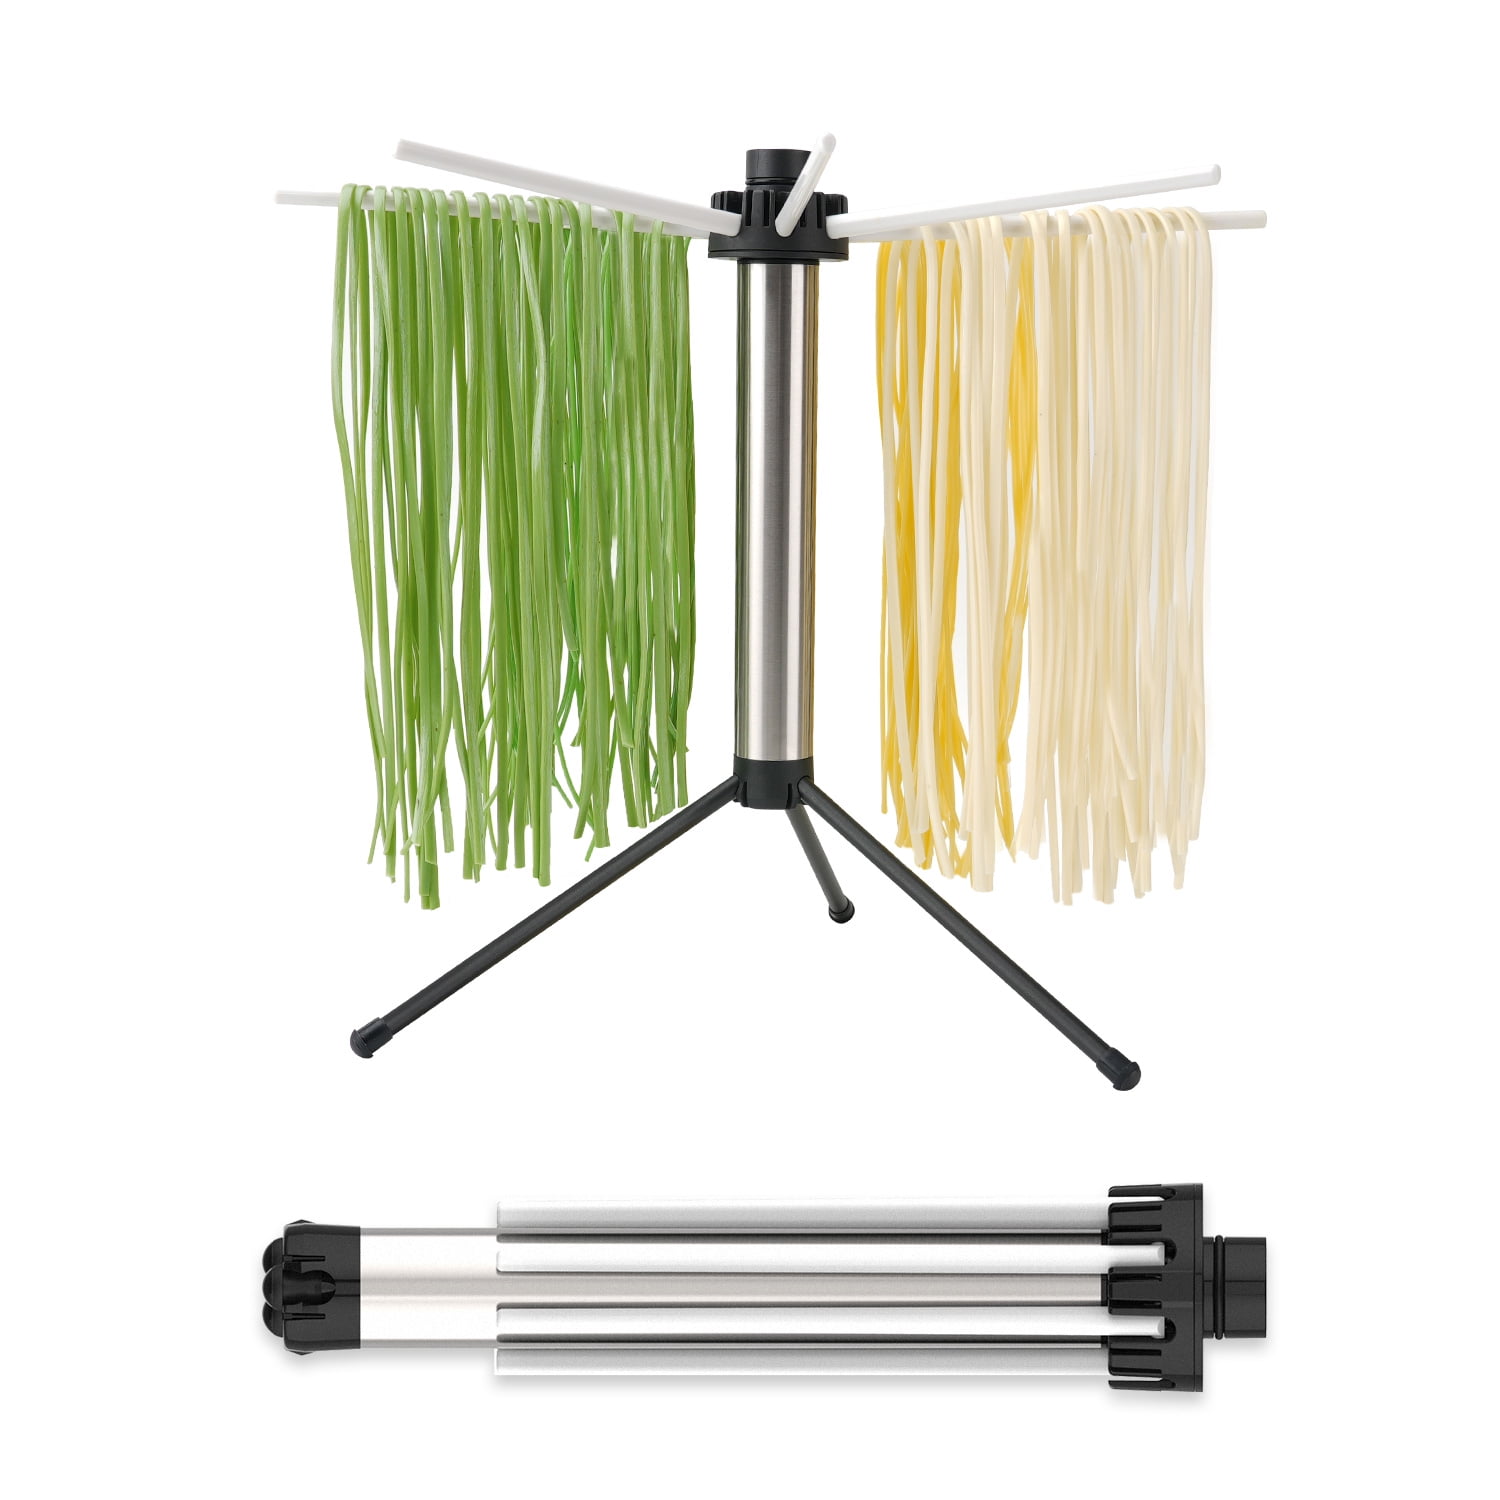 Collapsible Pasta Drying Rack Tall Spaghetti Noodle Dryer Stand for up to  2.5 kgs of Homemade Noodles Spaghetti Dryer Pasta Dryer Fresh Pasta Making  Accessories 